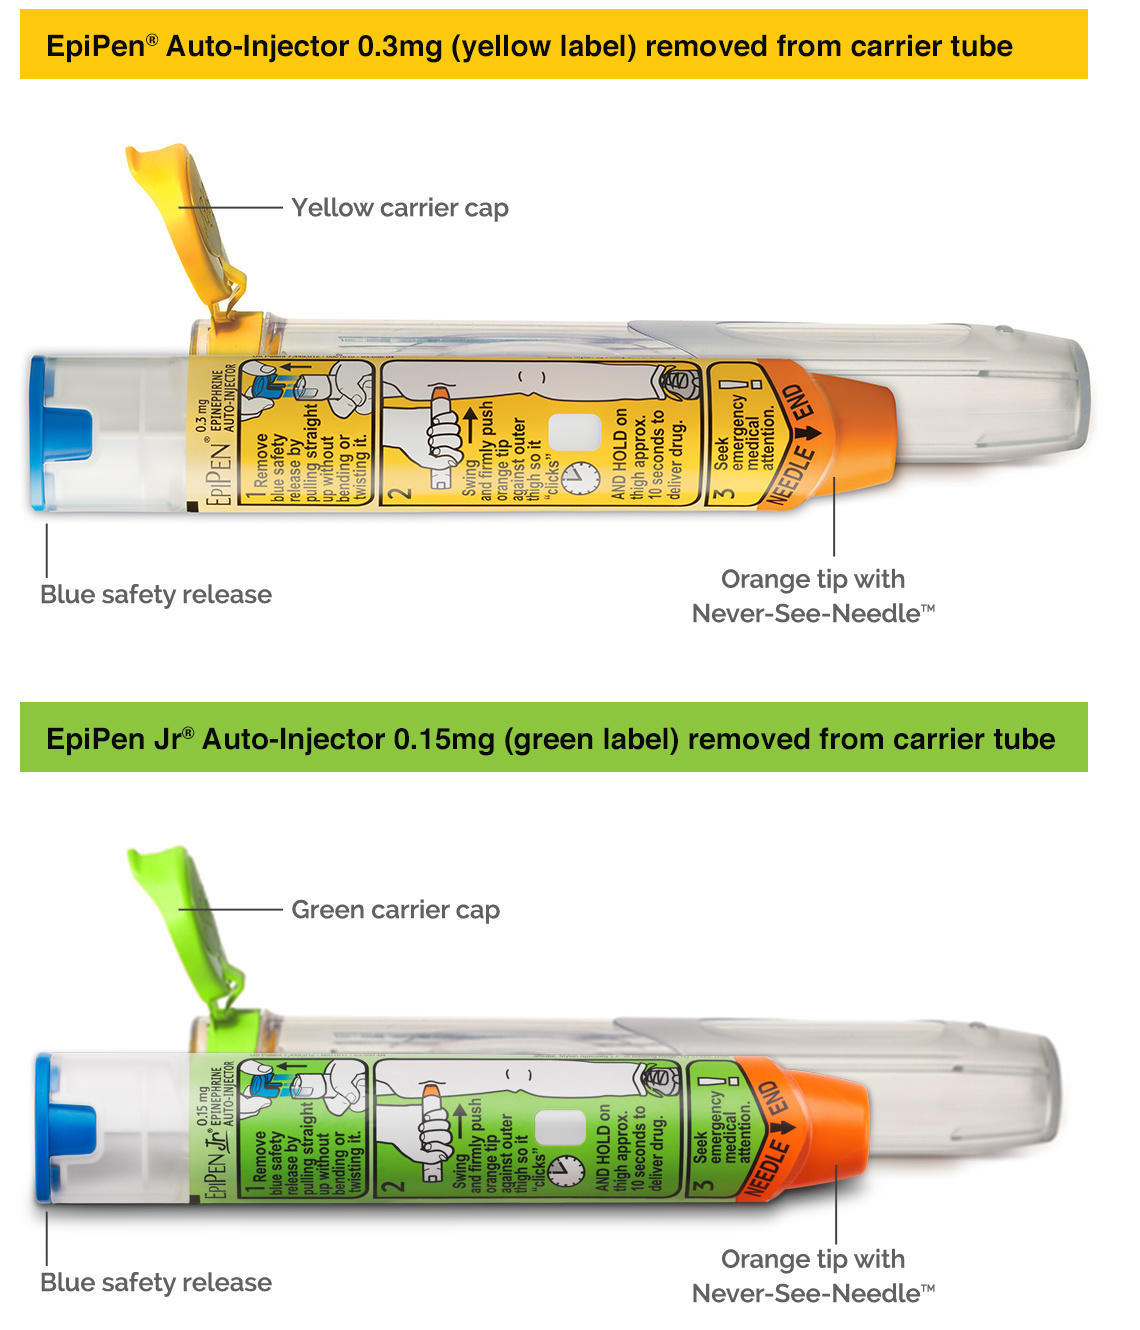 Always carry your EpiPen with you.